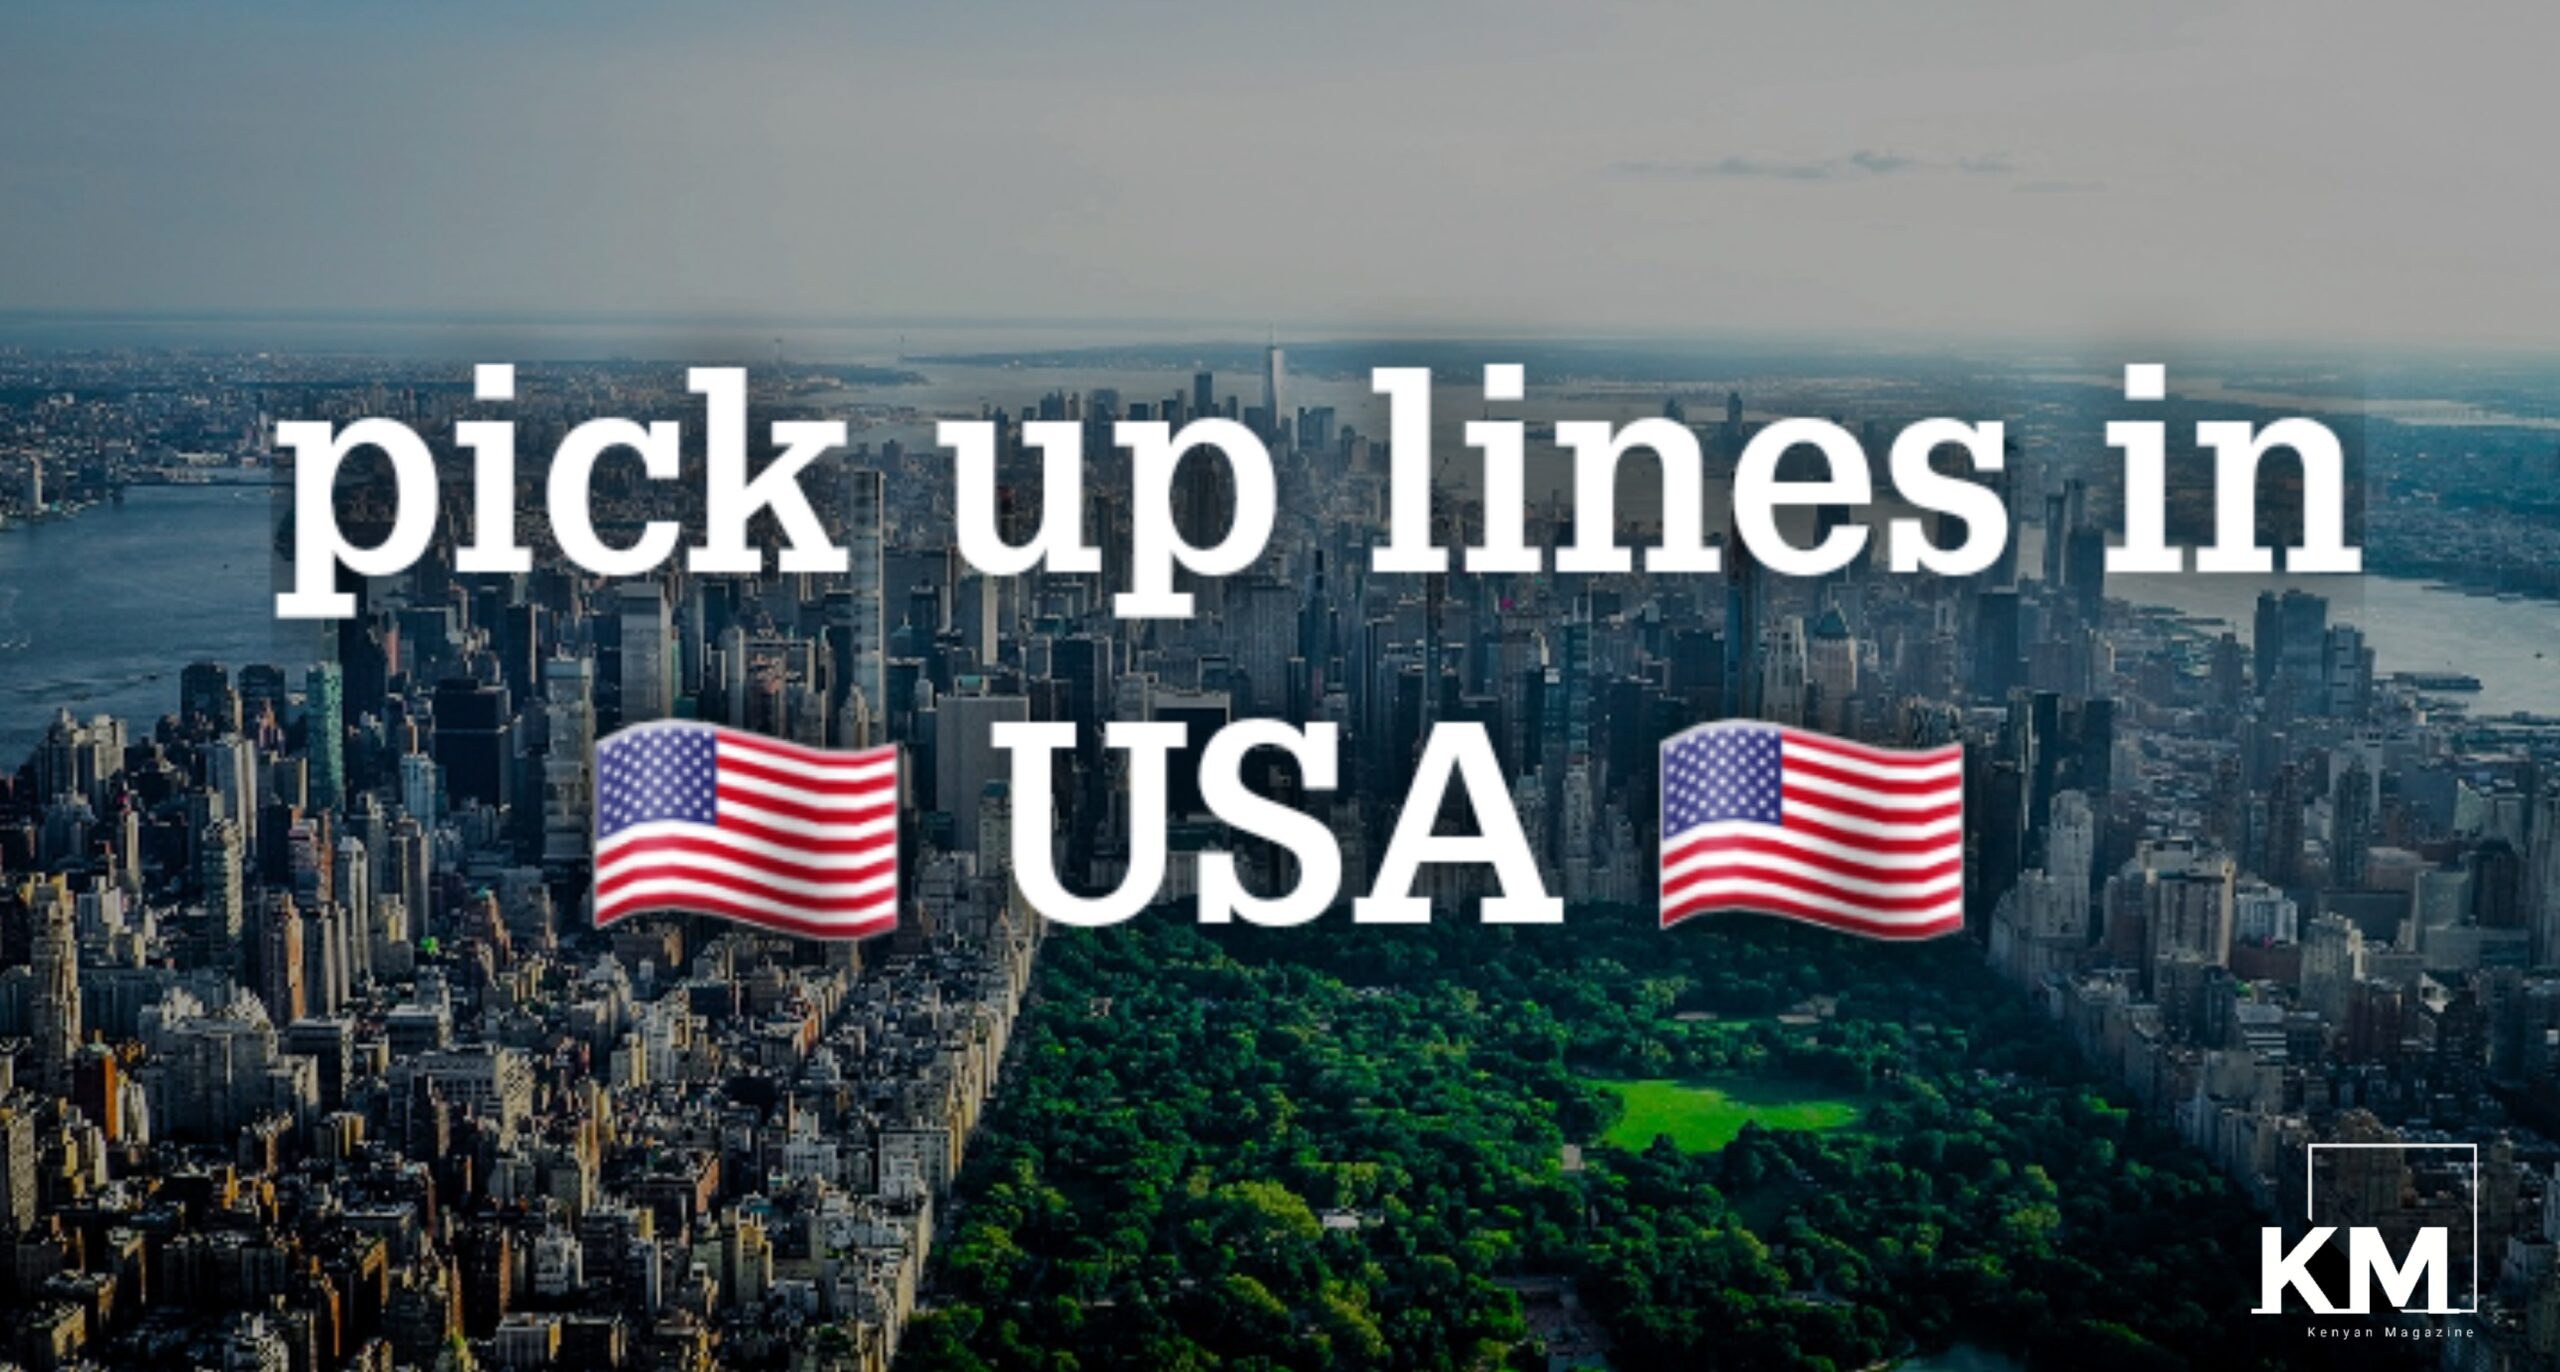 Pick up lines in America